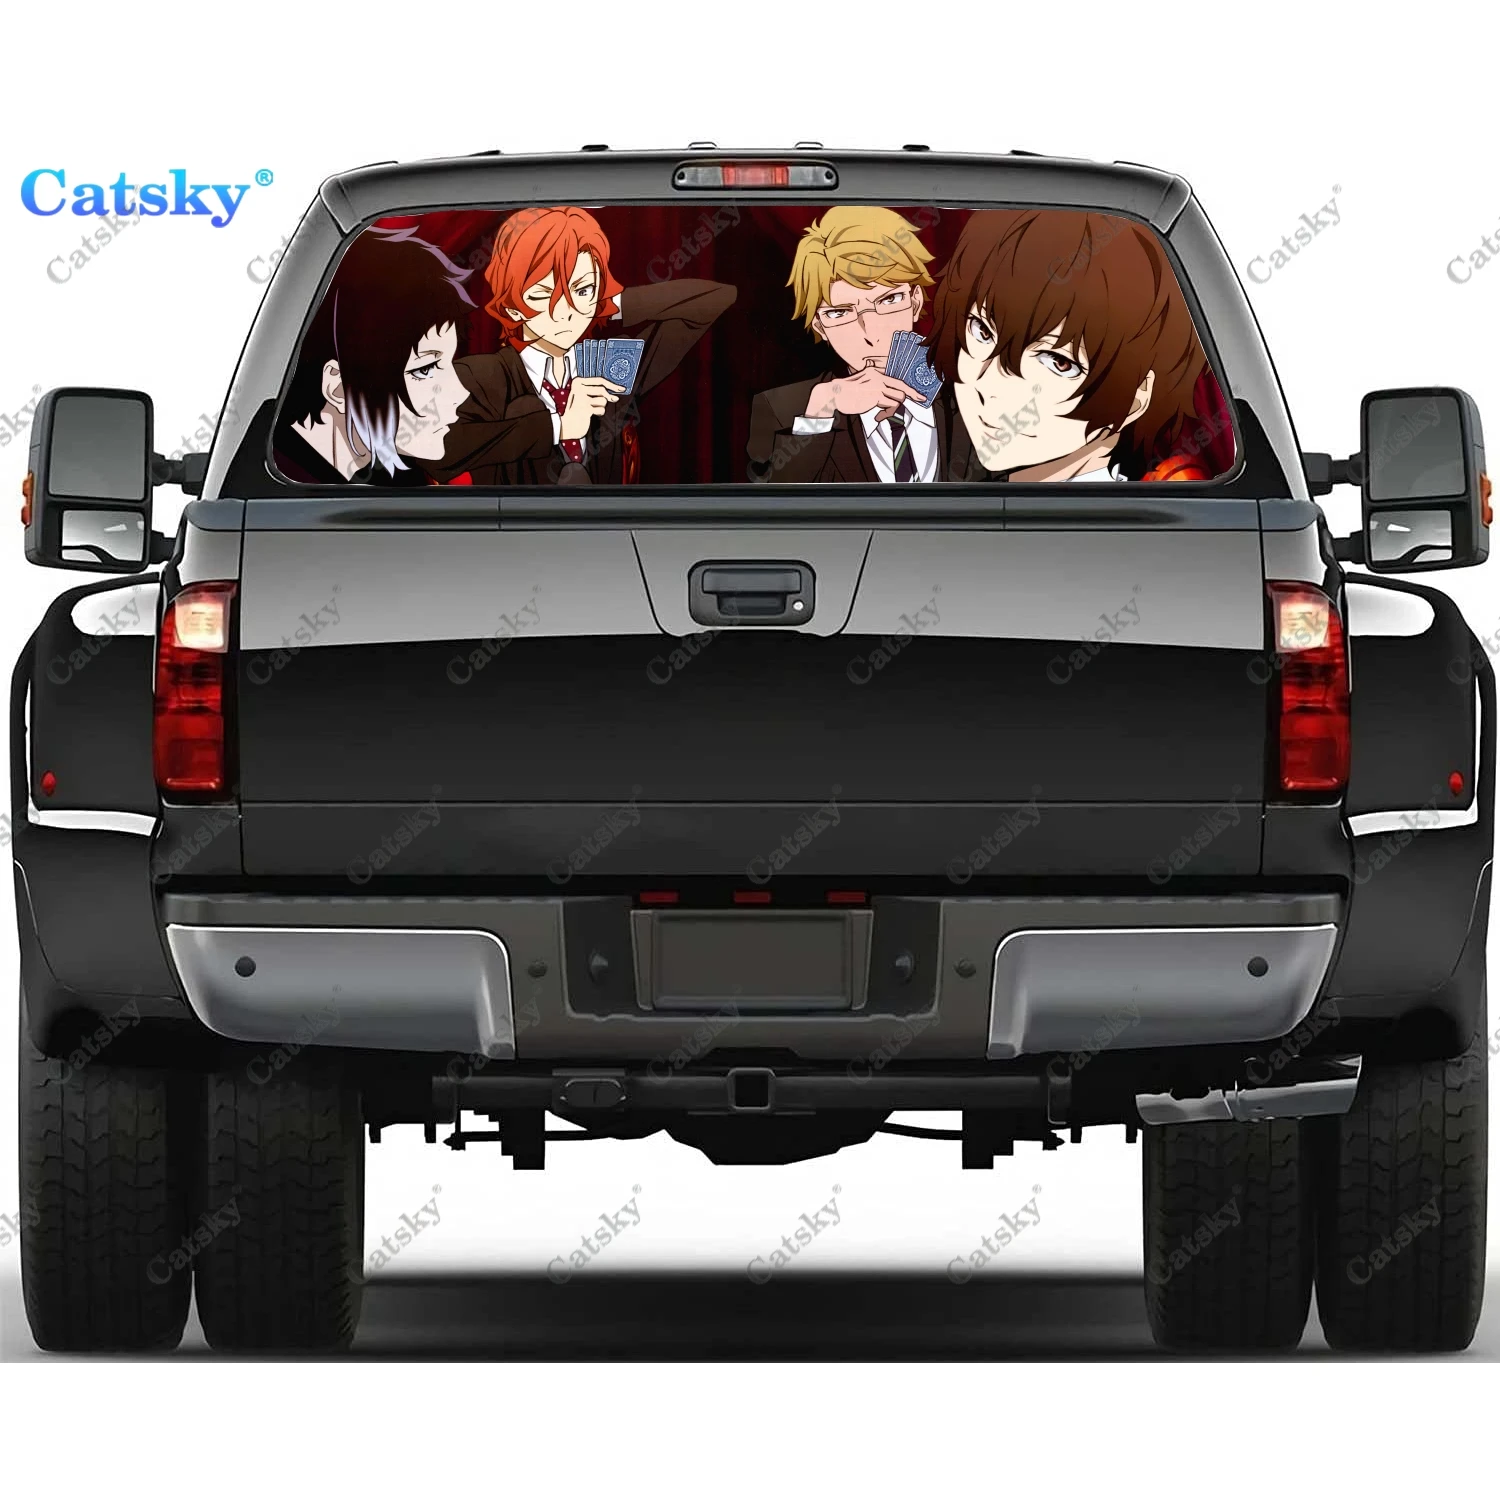 

Bungou Stray Dogs Anime Rear Window Stickers Windshield Decal Truck Rear Window Decal Universal Tint Perforated Vinyl Graphic